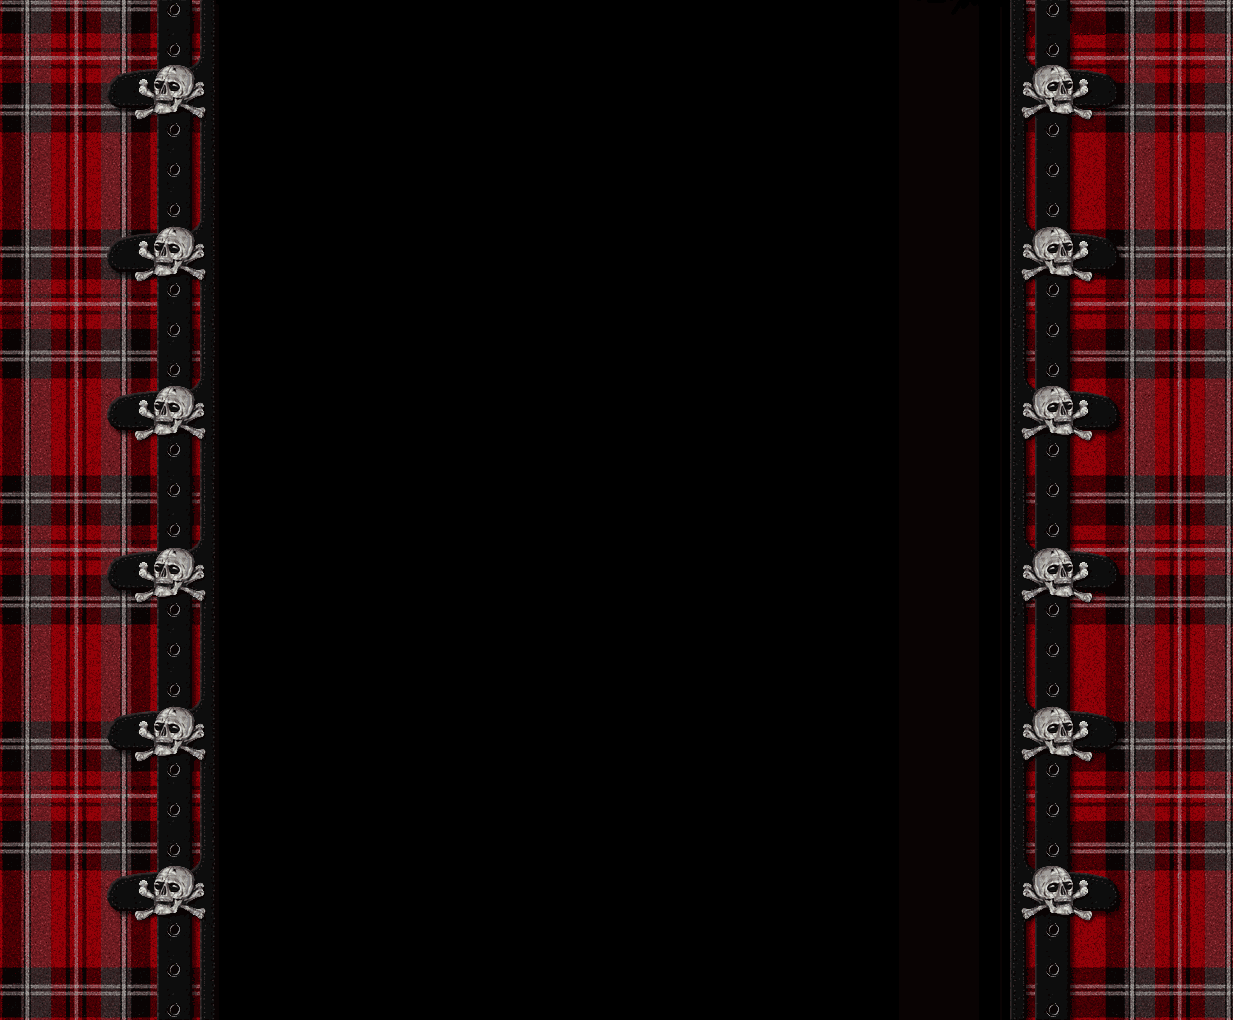 Skull red black checks wallpaper background picture and layout